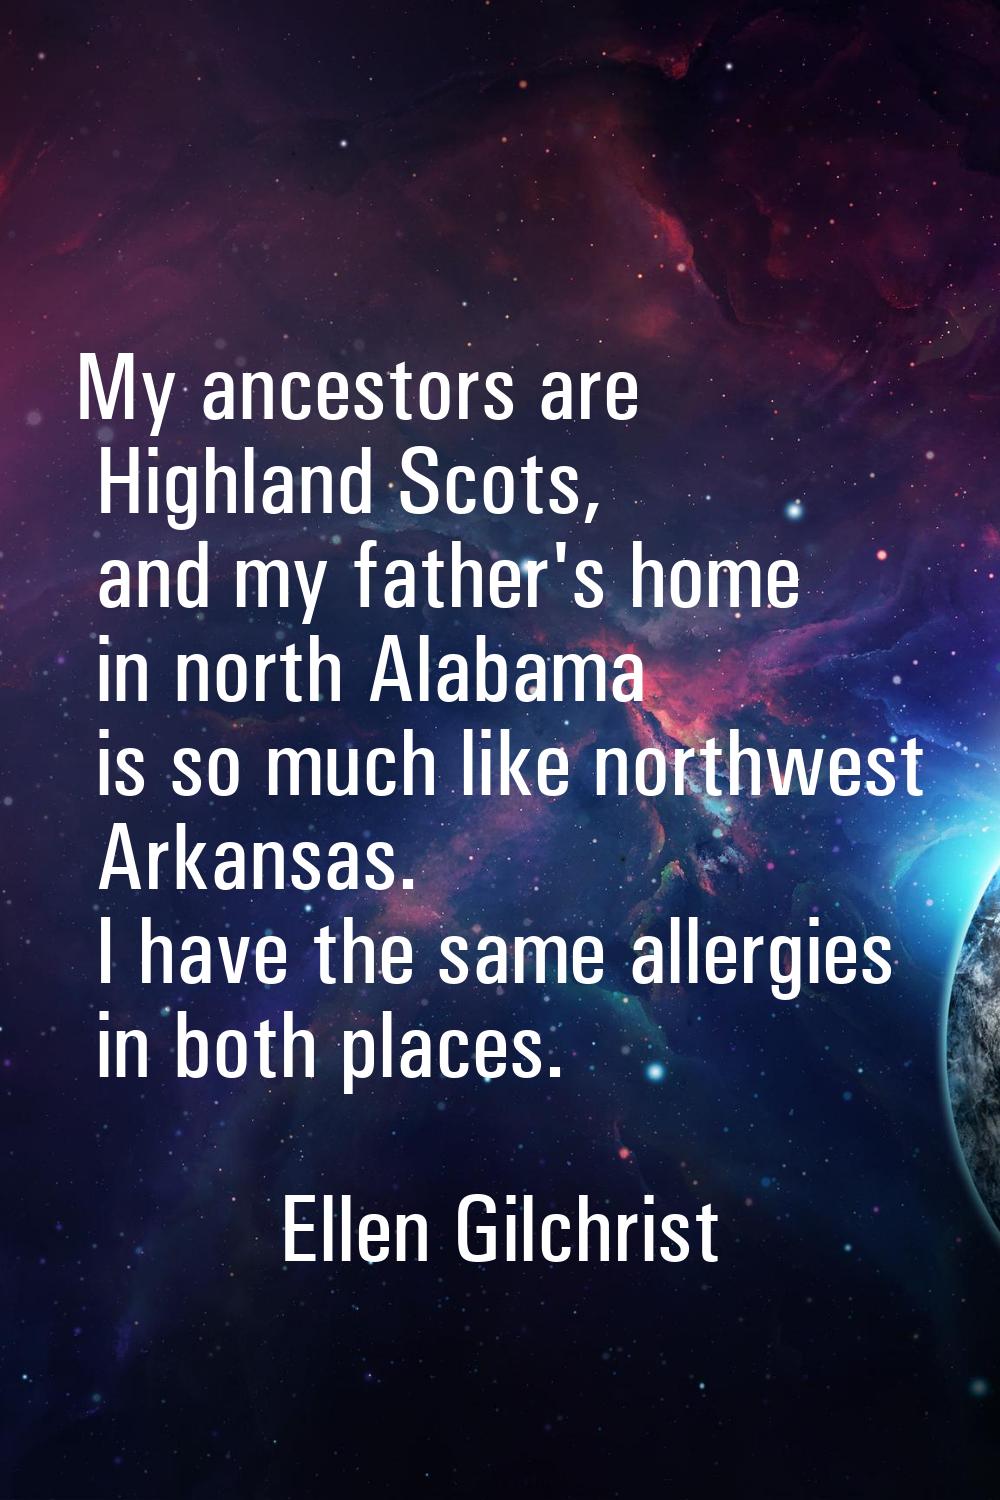 My ancestors are Highland Scots, and my father's home in north Alabama is so much like northwest Ar